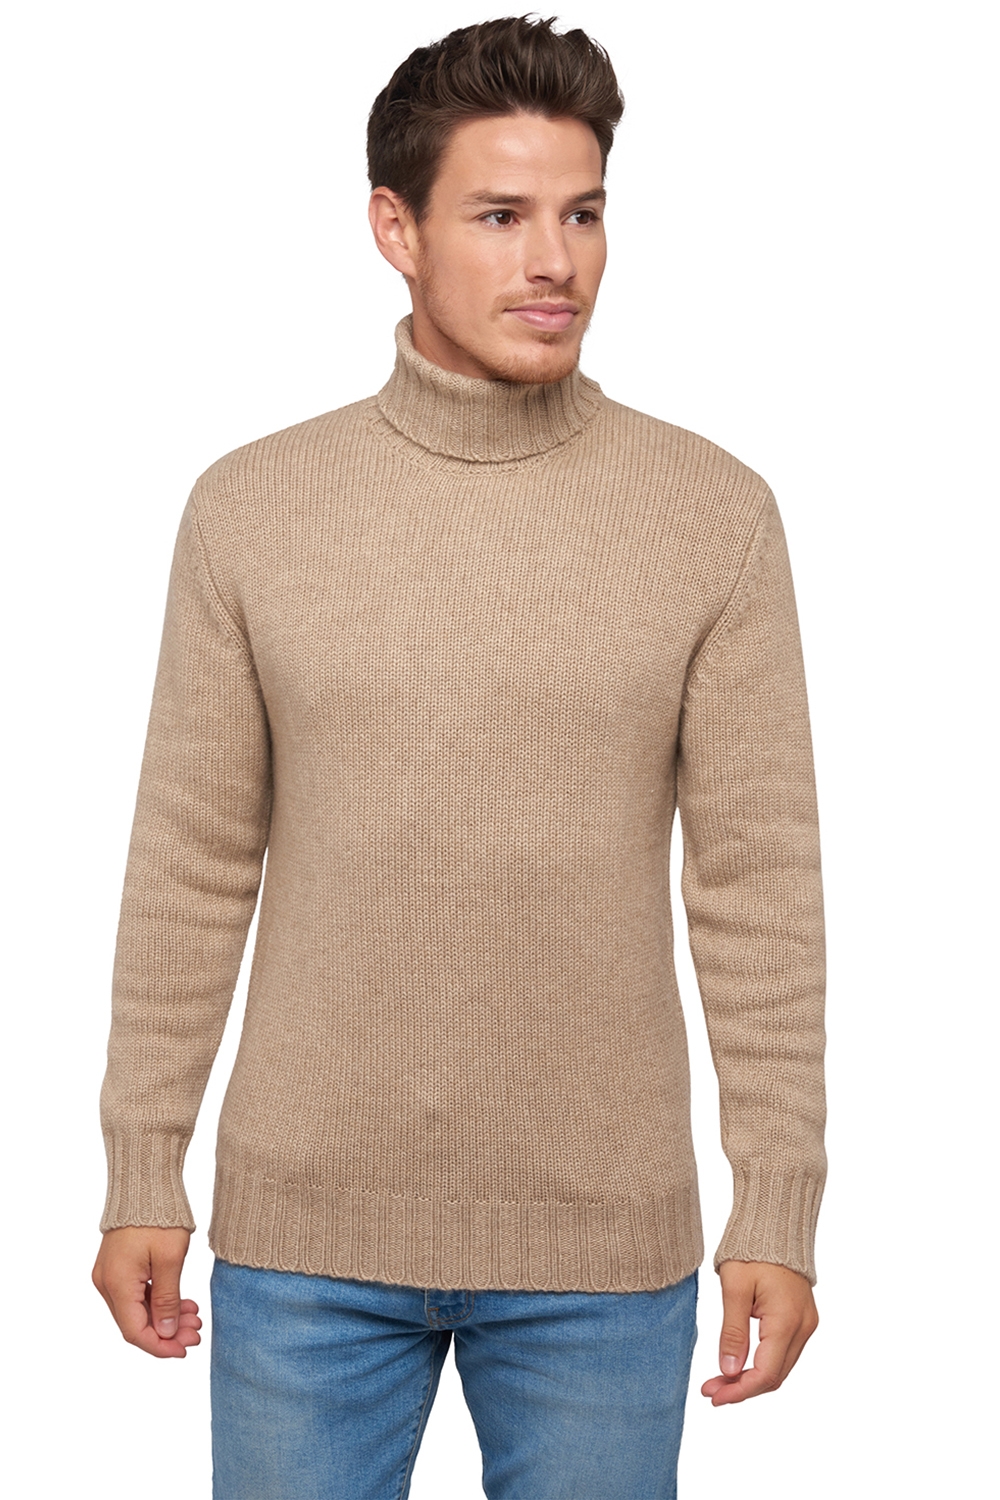 Cachemire Naturel pull homme col roule natural chichi natural brown m